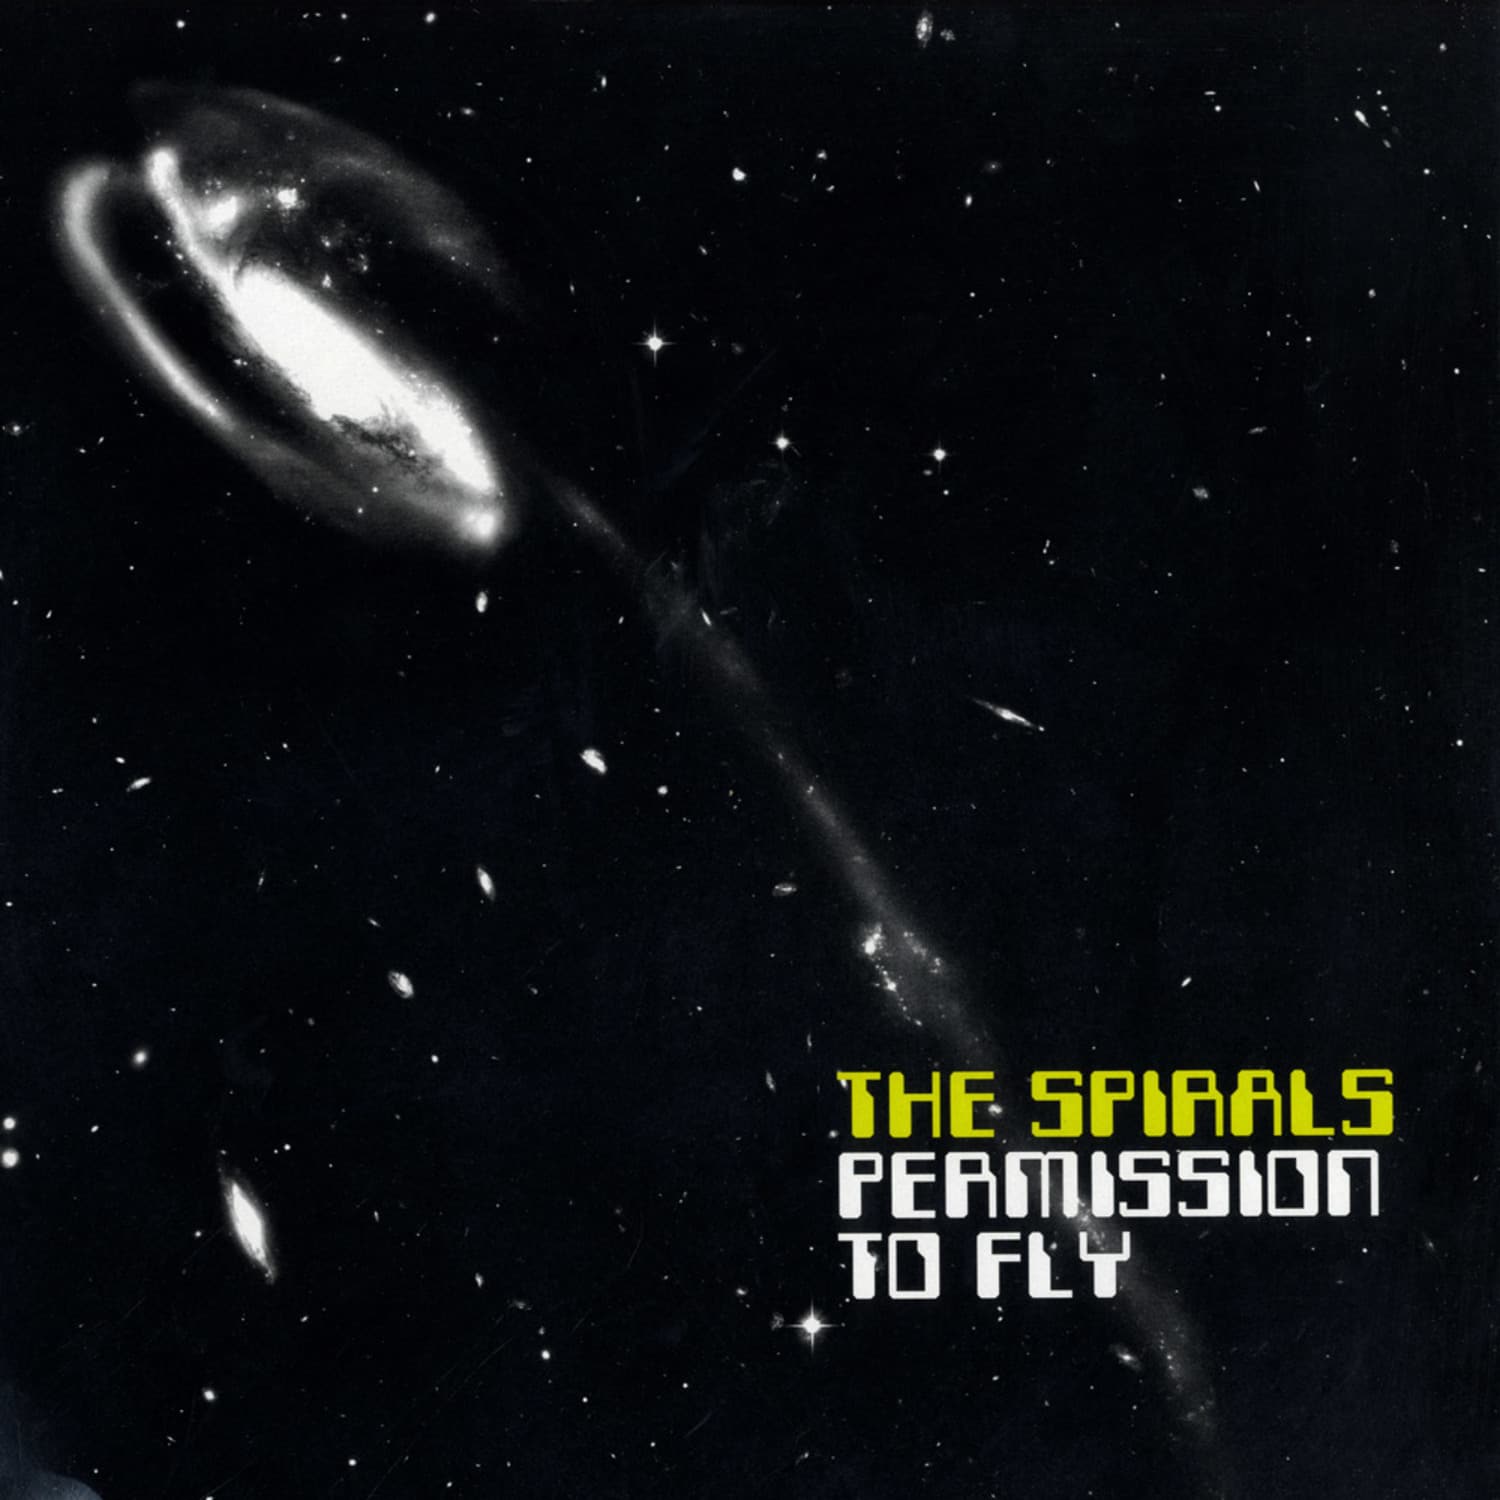 The Spirals - PERMISSION TO FLY EP